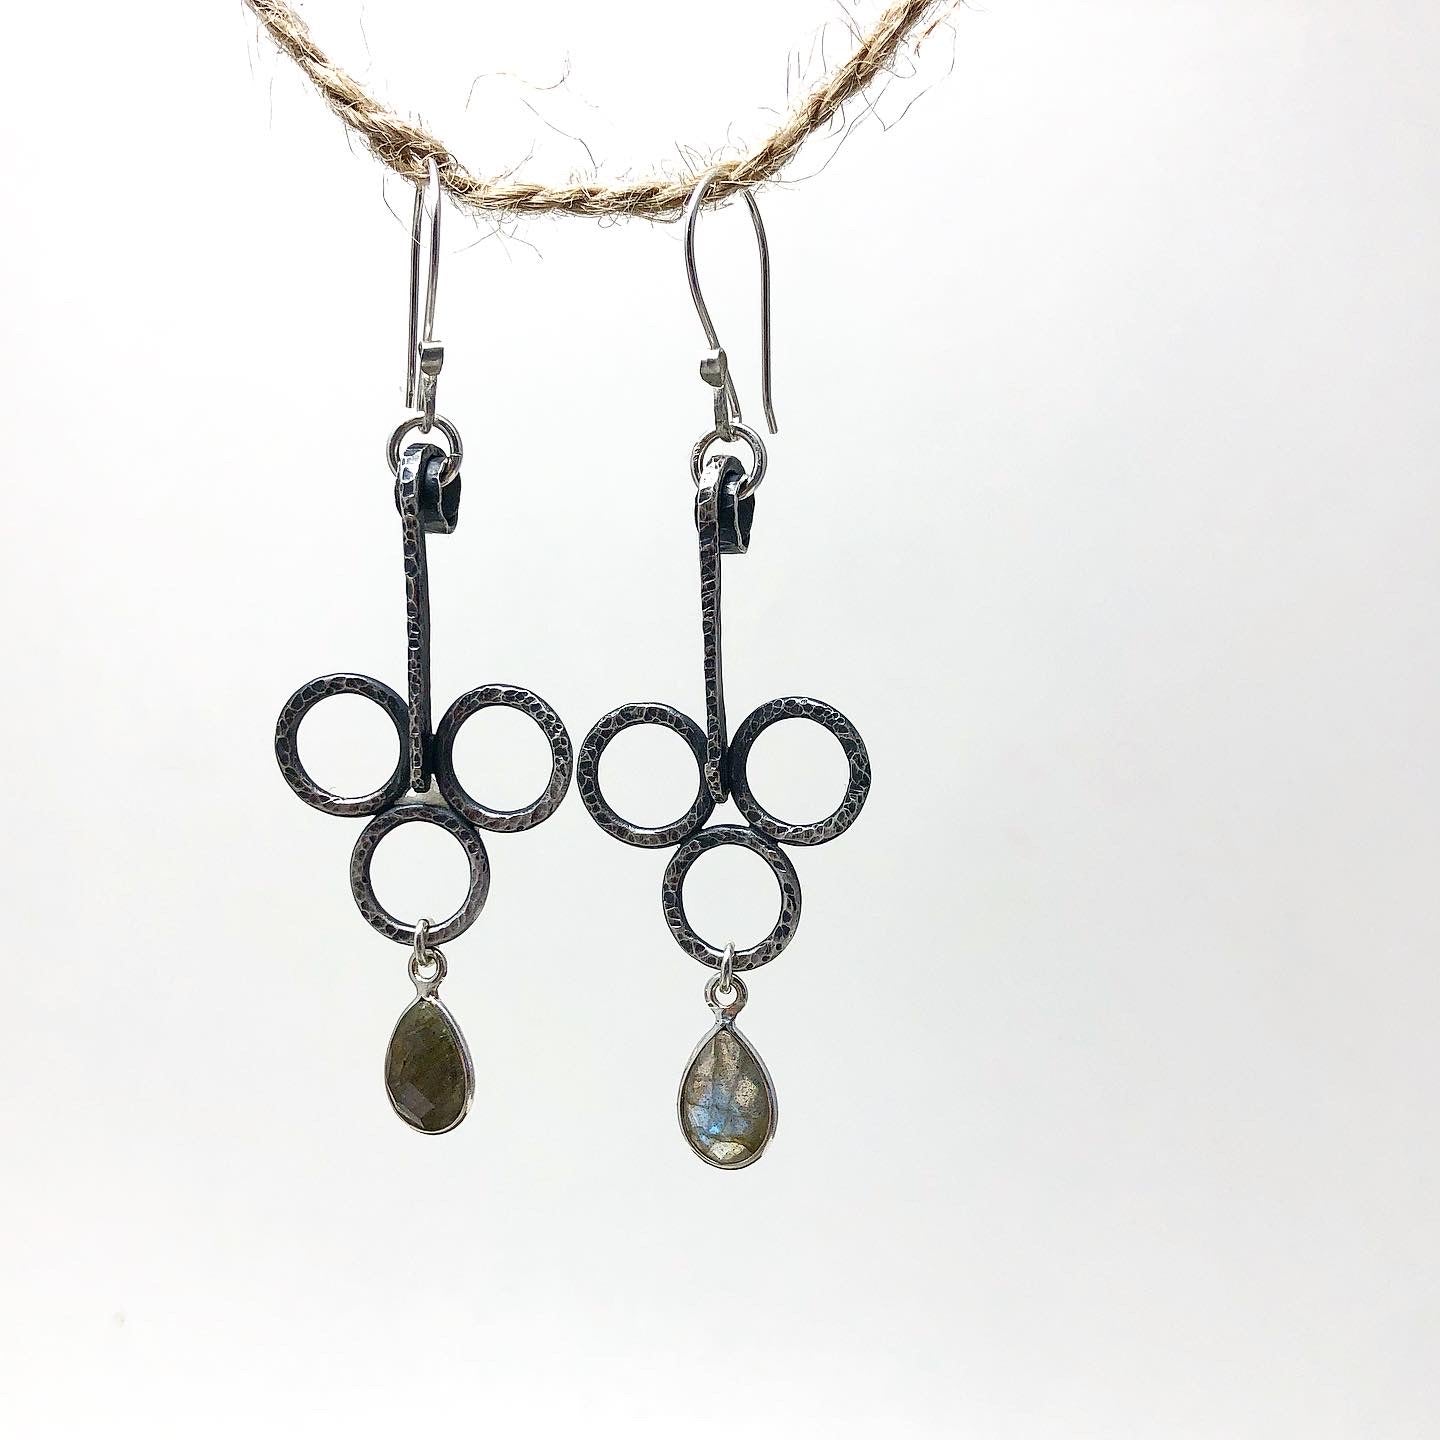 Balance X in Handcrafted Sterling Silver with Labadorite Dangles